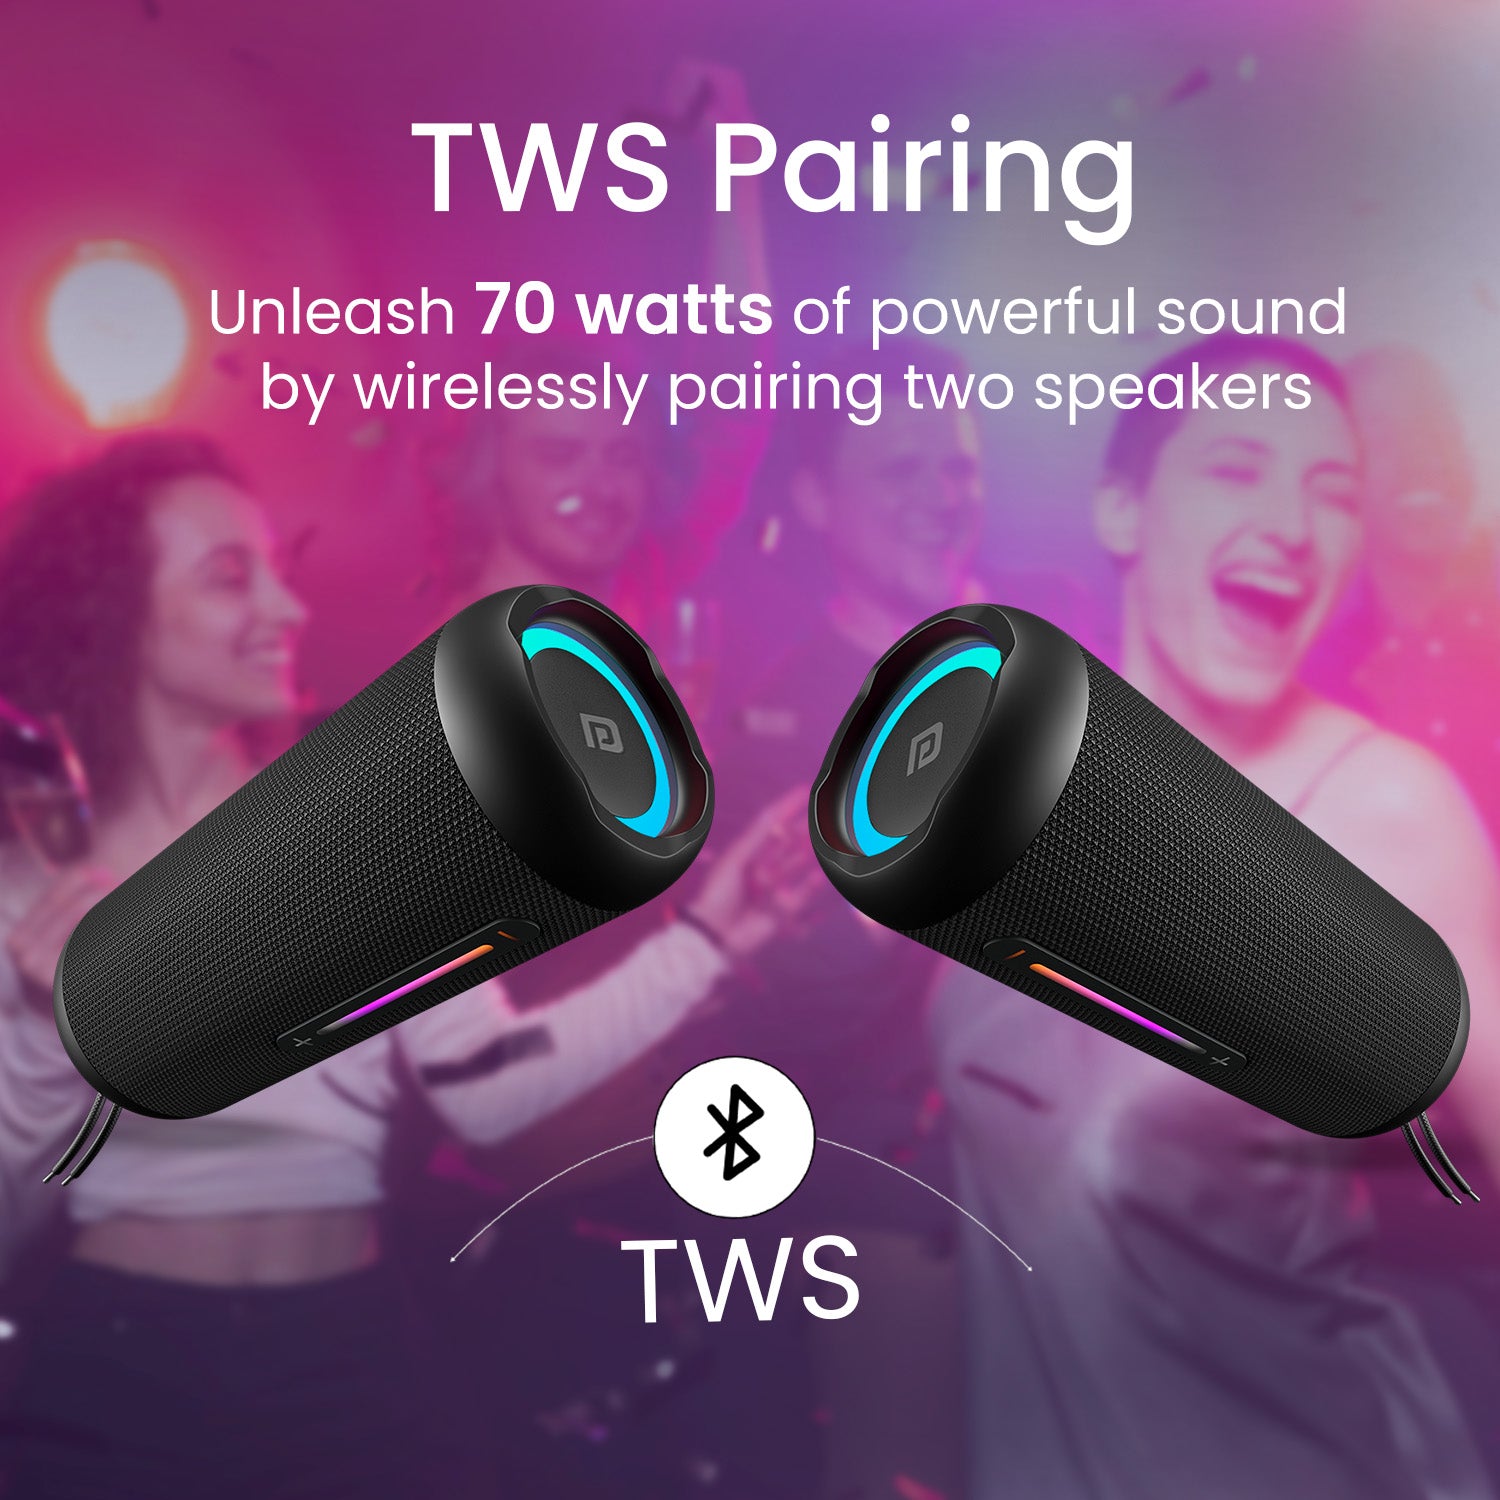 Black Portronics Breeze 6 portable Bluetooth speaker comes with TWS connectivity options to merge two speaker at time for louder music